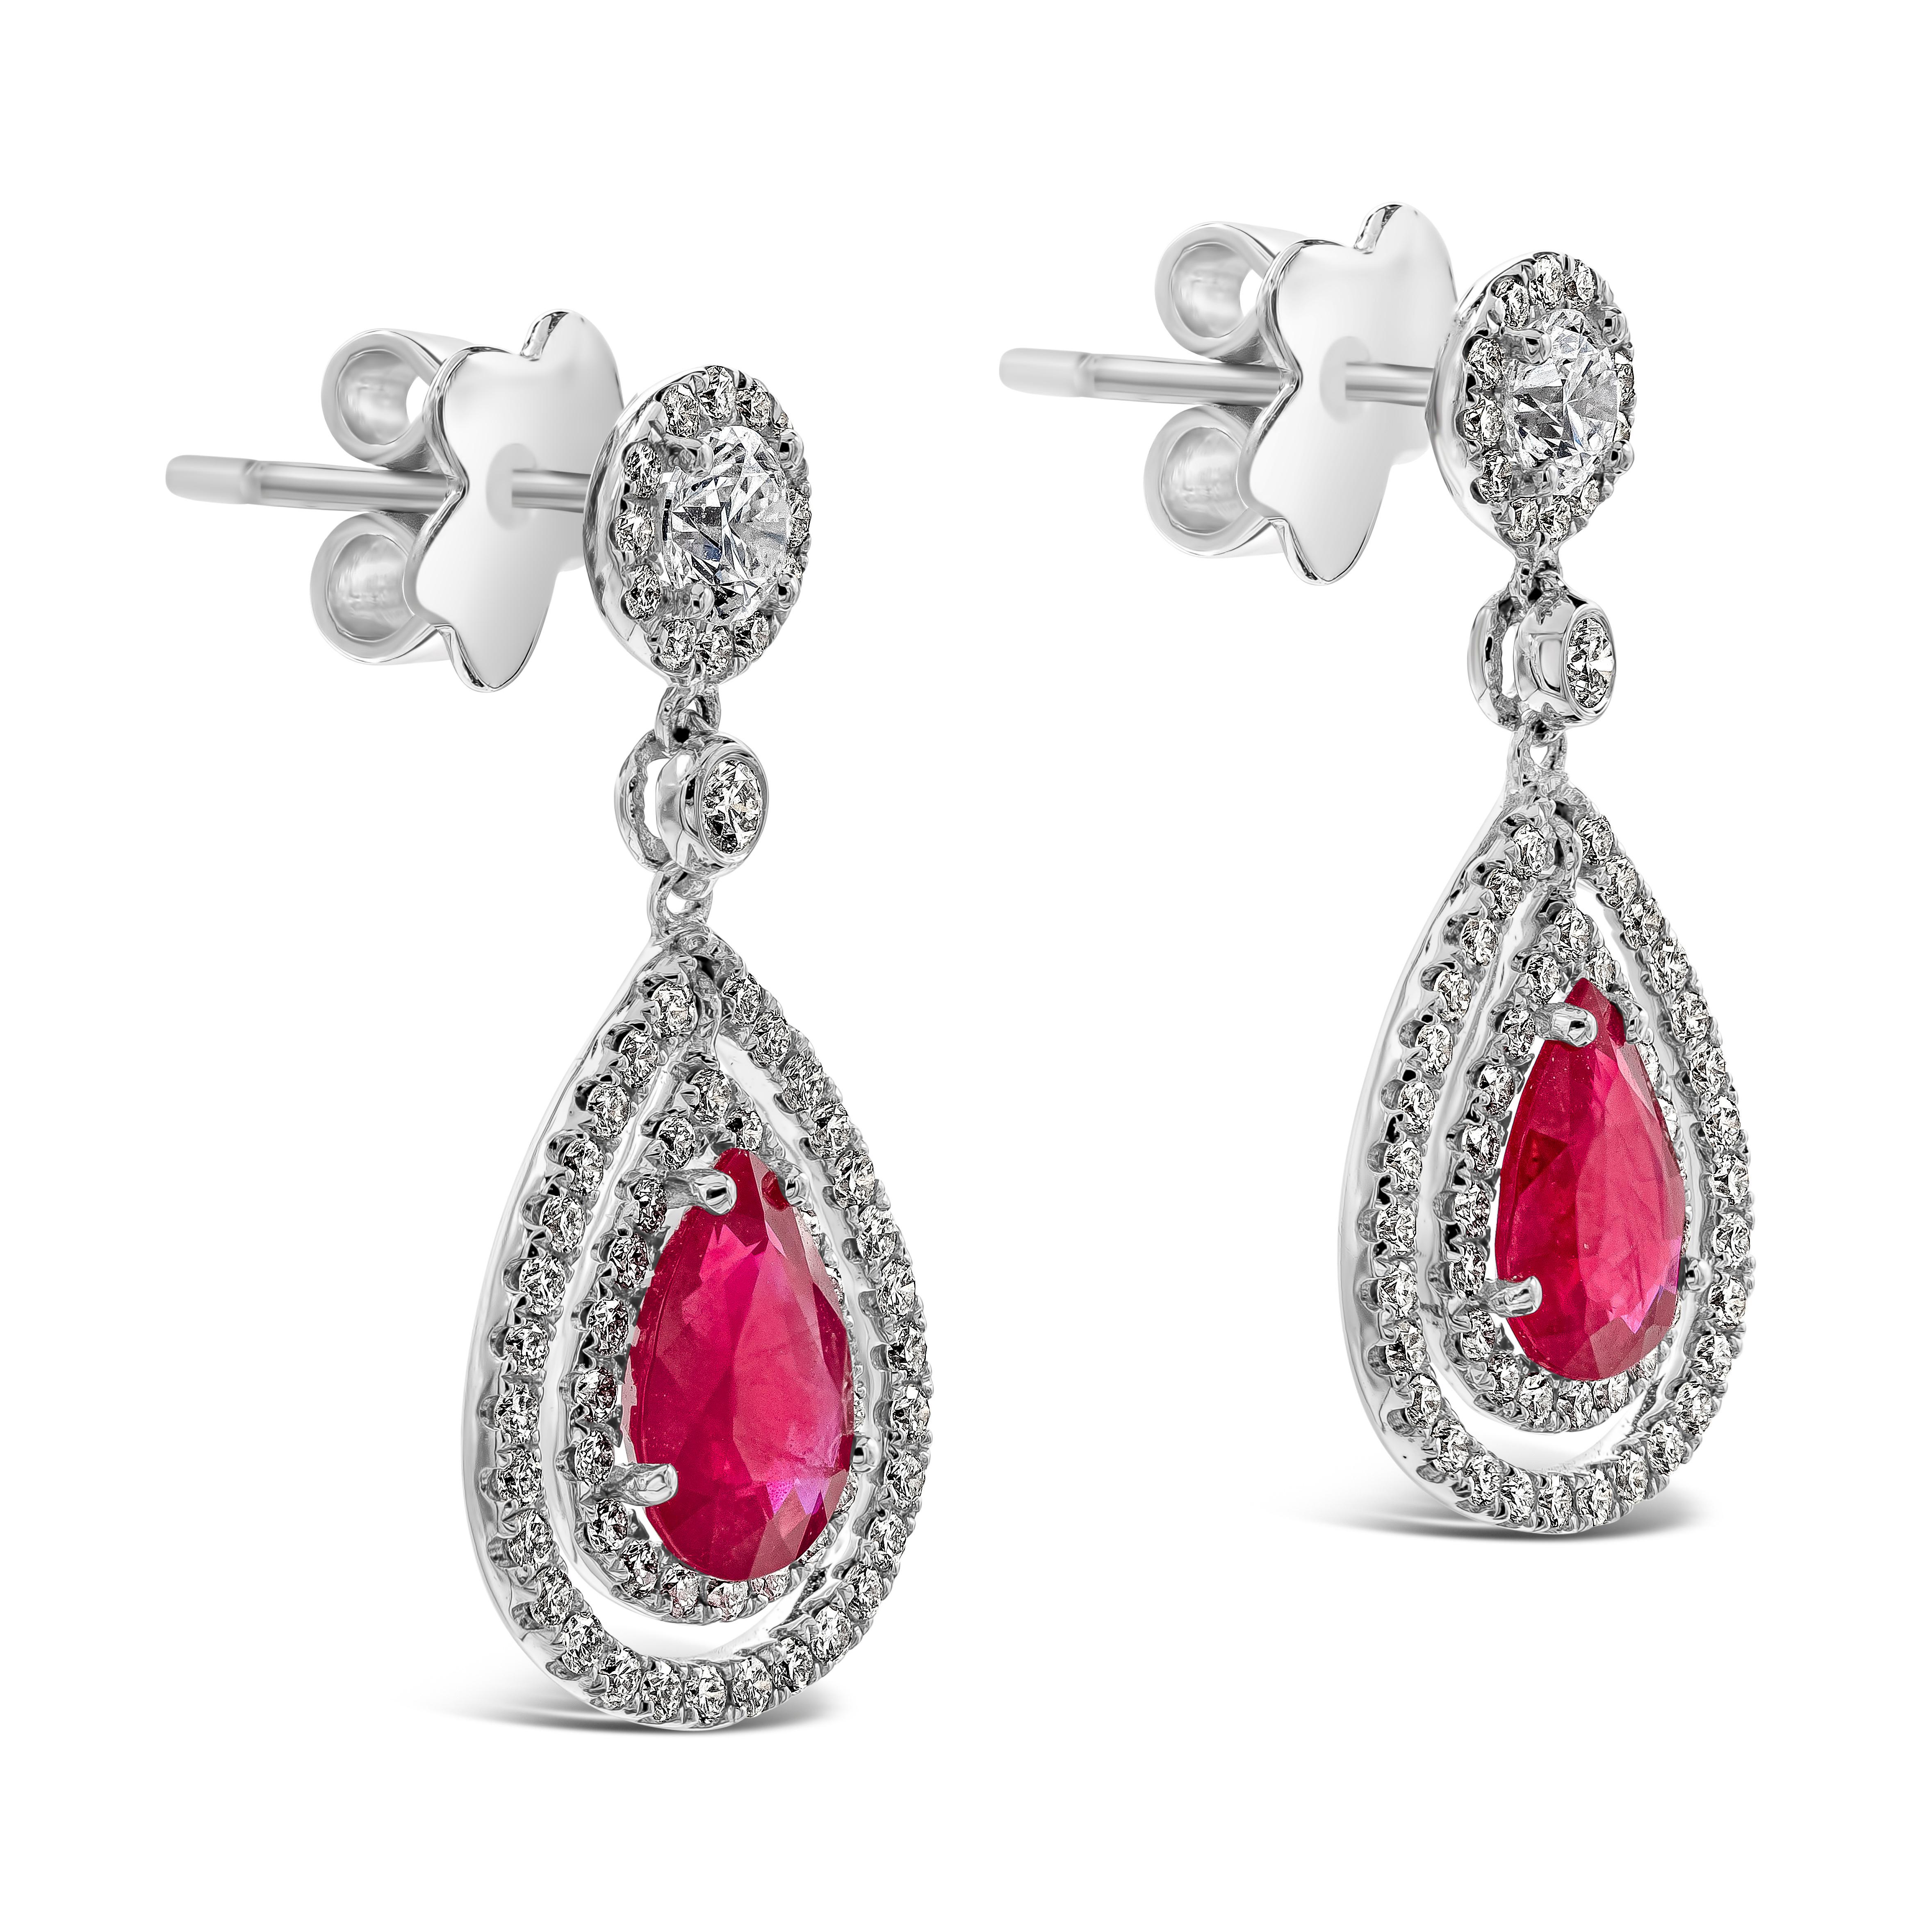 These dangle earrings are set with natural pear shape rubies weighing 2.20 carats total. Each ruby is surrounded by double halo of round brilliant melee diamonds. The jump ring and upper dangle is diamond encrusted in halo setting. Accent diamonds